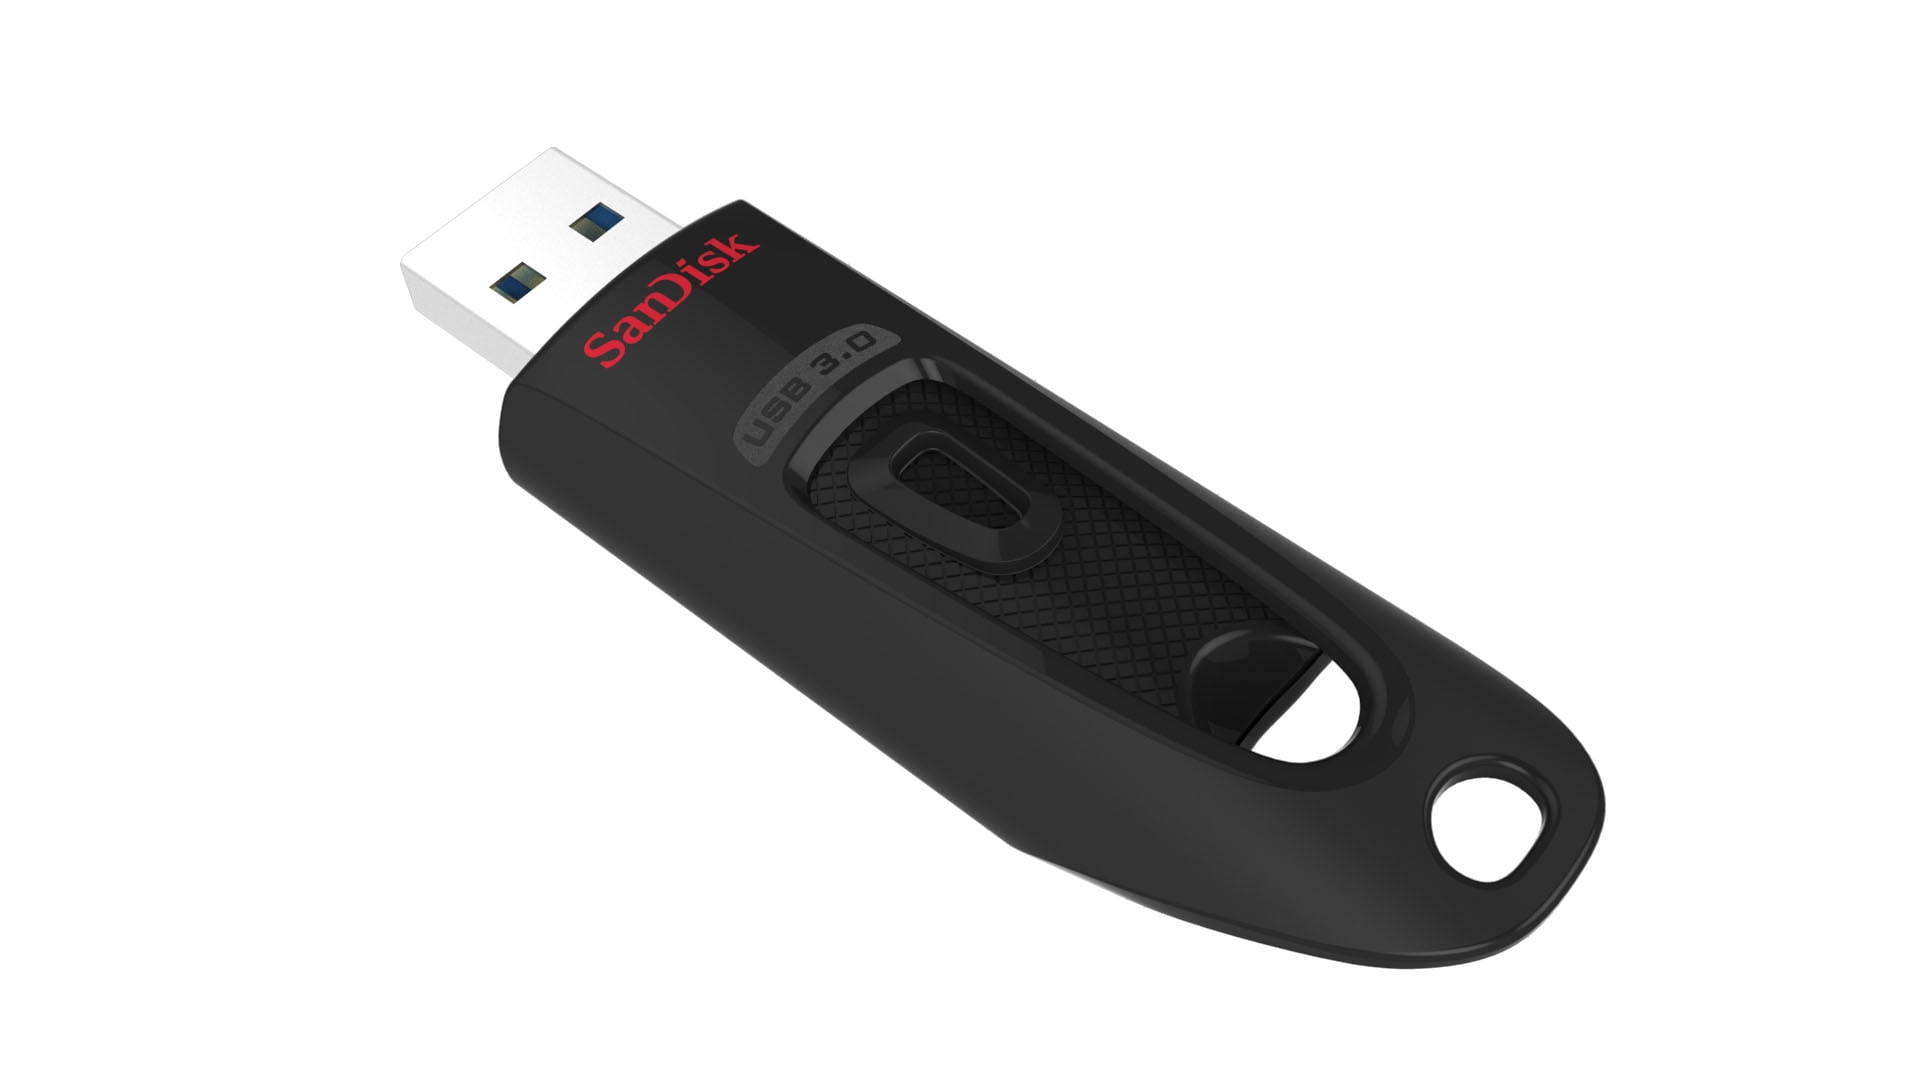 SanDisk 128GB Ultra 3.0 Flash Drive - 130MB/s - SDCZ48-128G-AW46 -